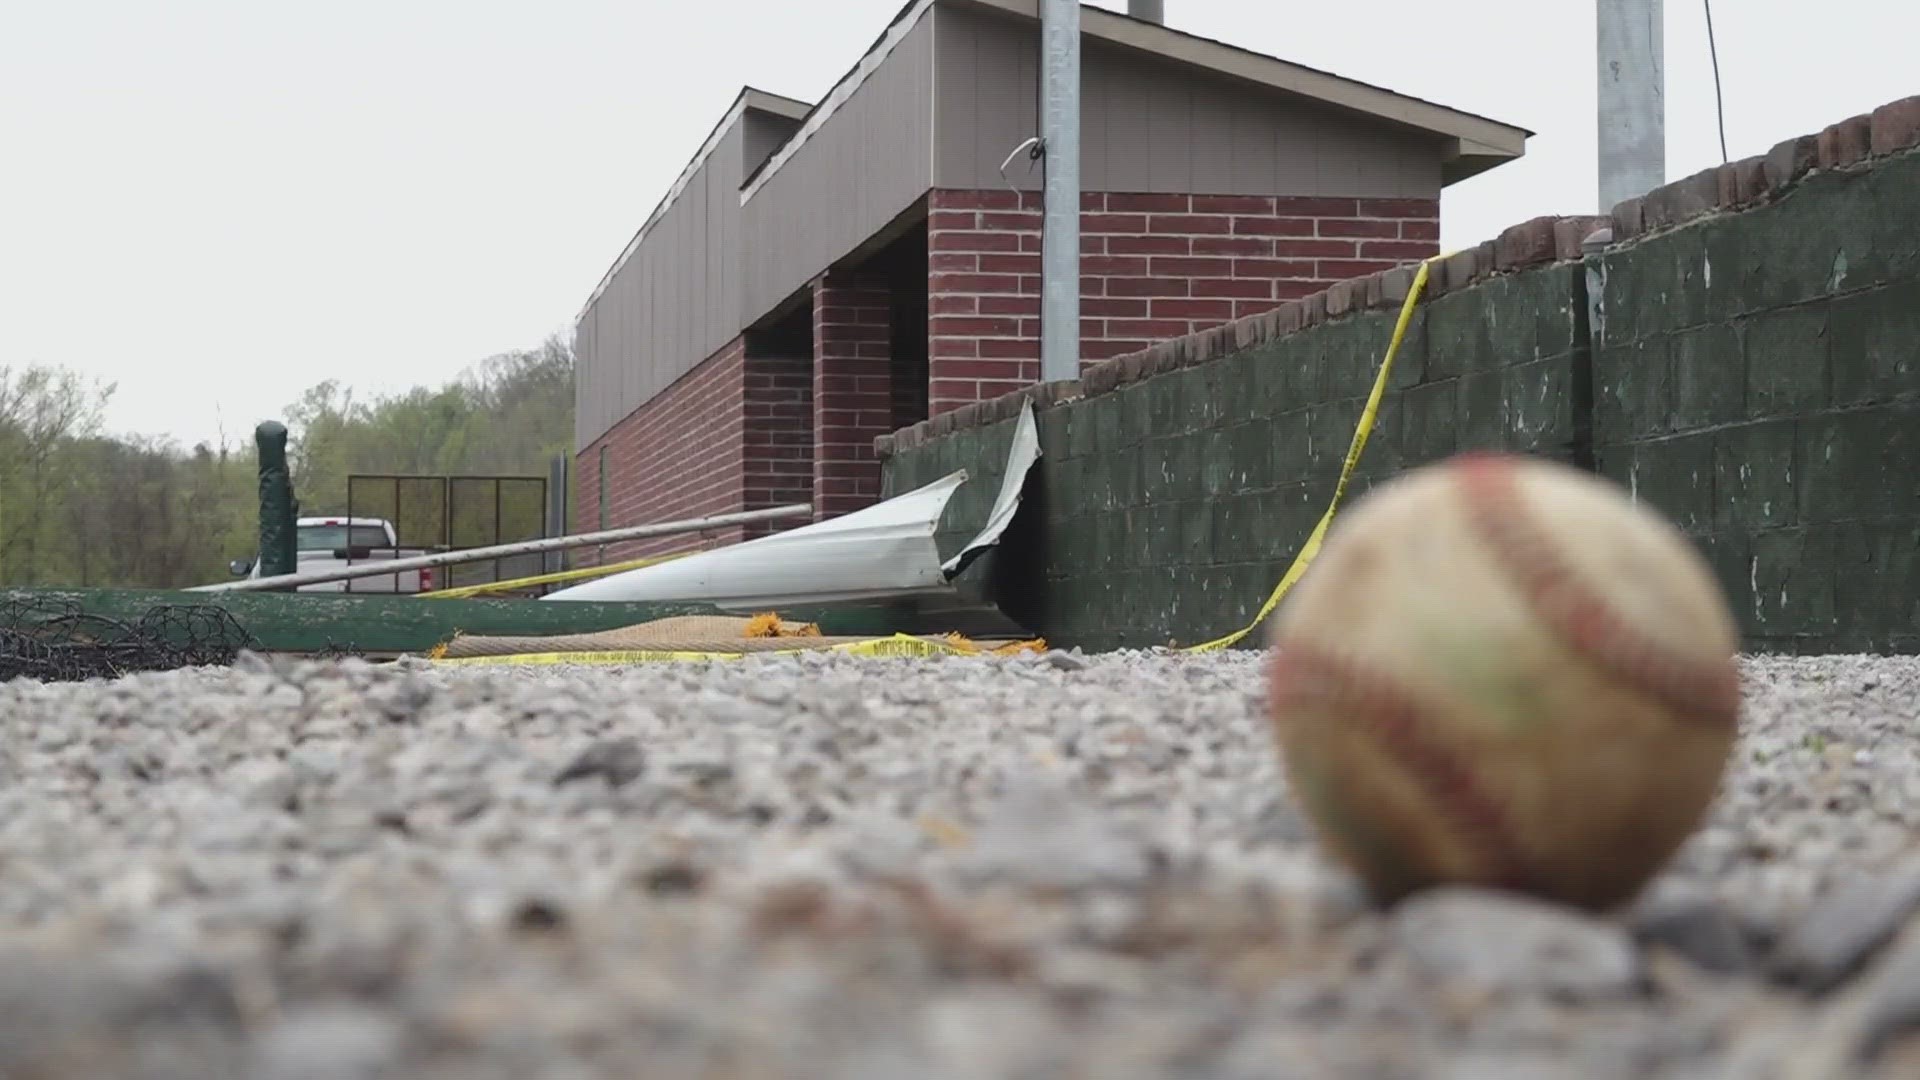 The National Weather Service said those winds ripped the roof off a baseball dugout Saturday evening.